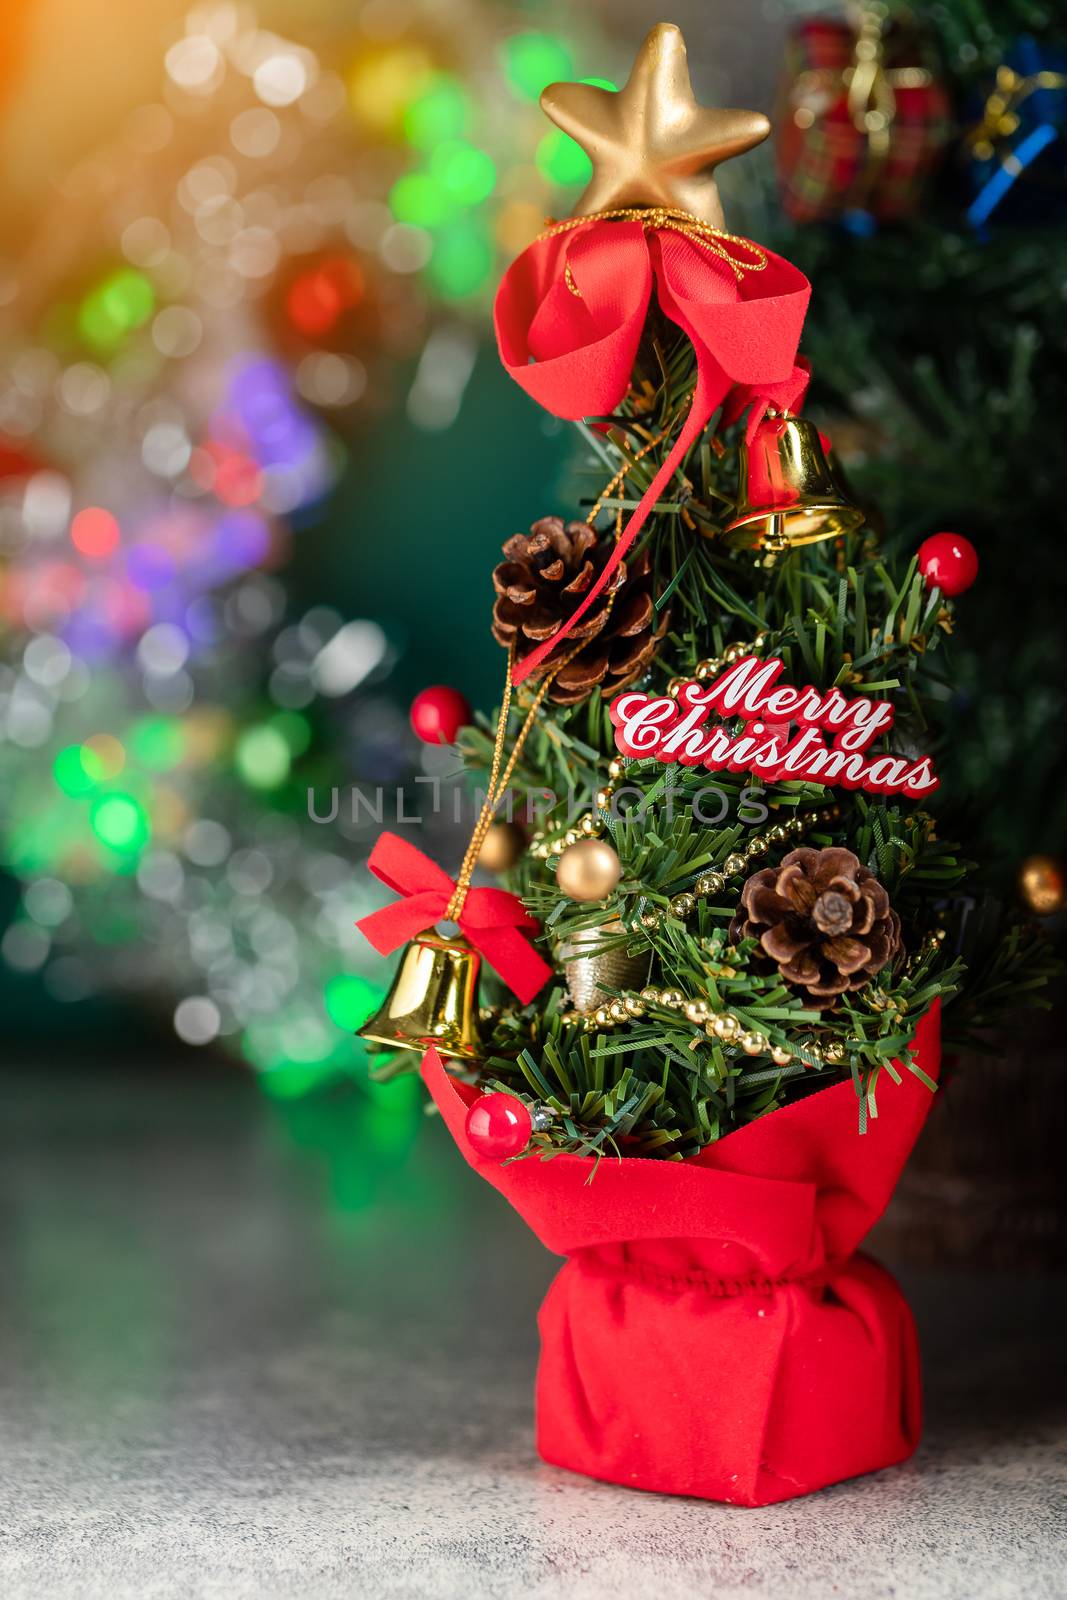 Christmas Background Of Defocused Lights With Decorated Tree